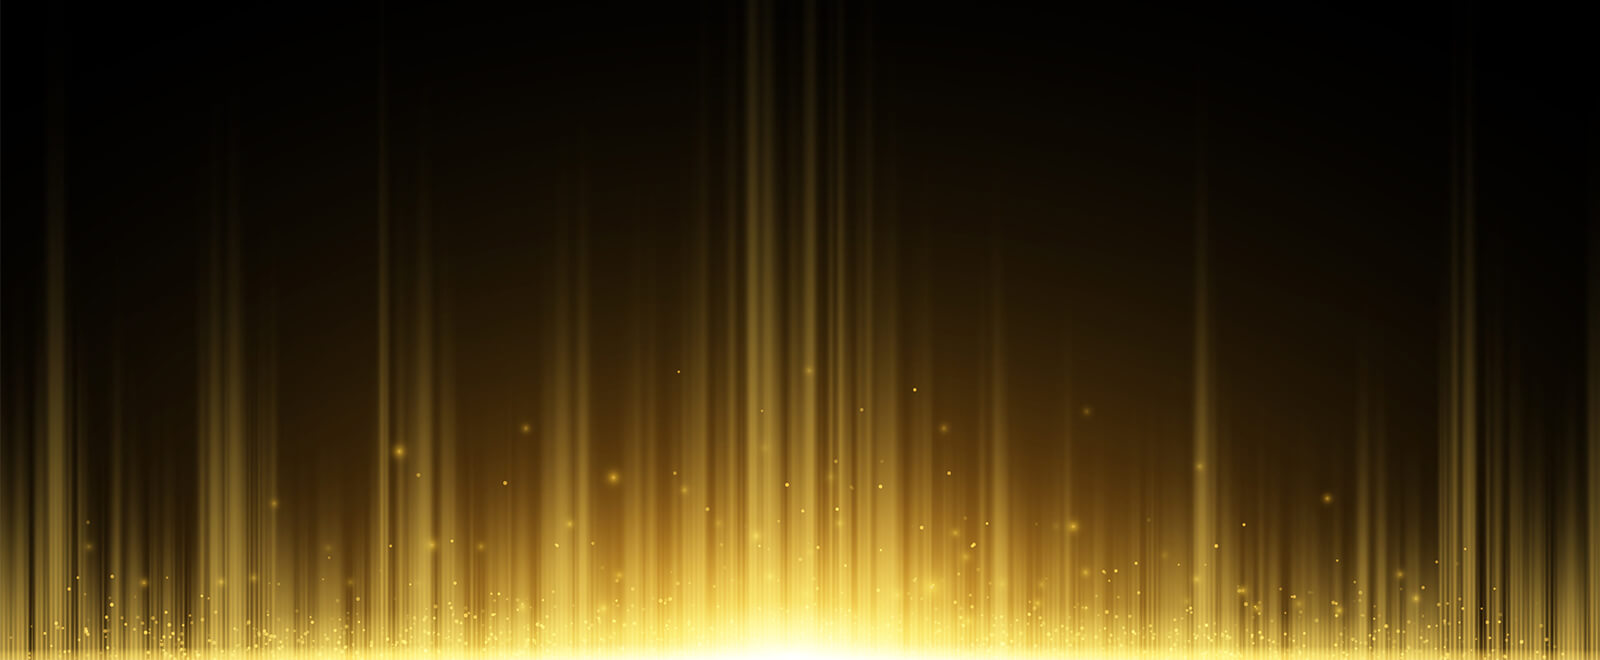 Background a dark gray stage curtain with golden shadows at the bottom